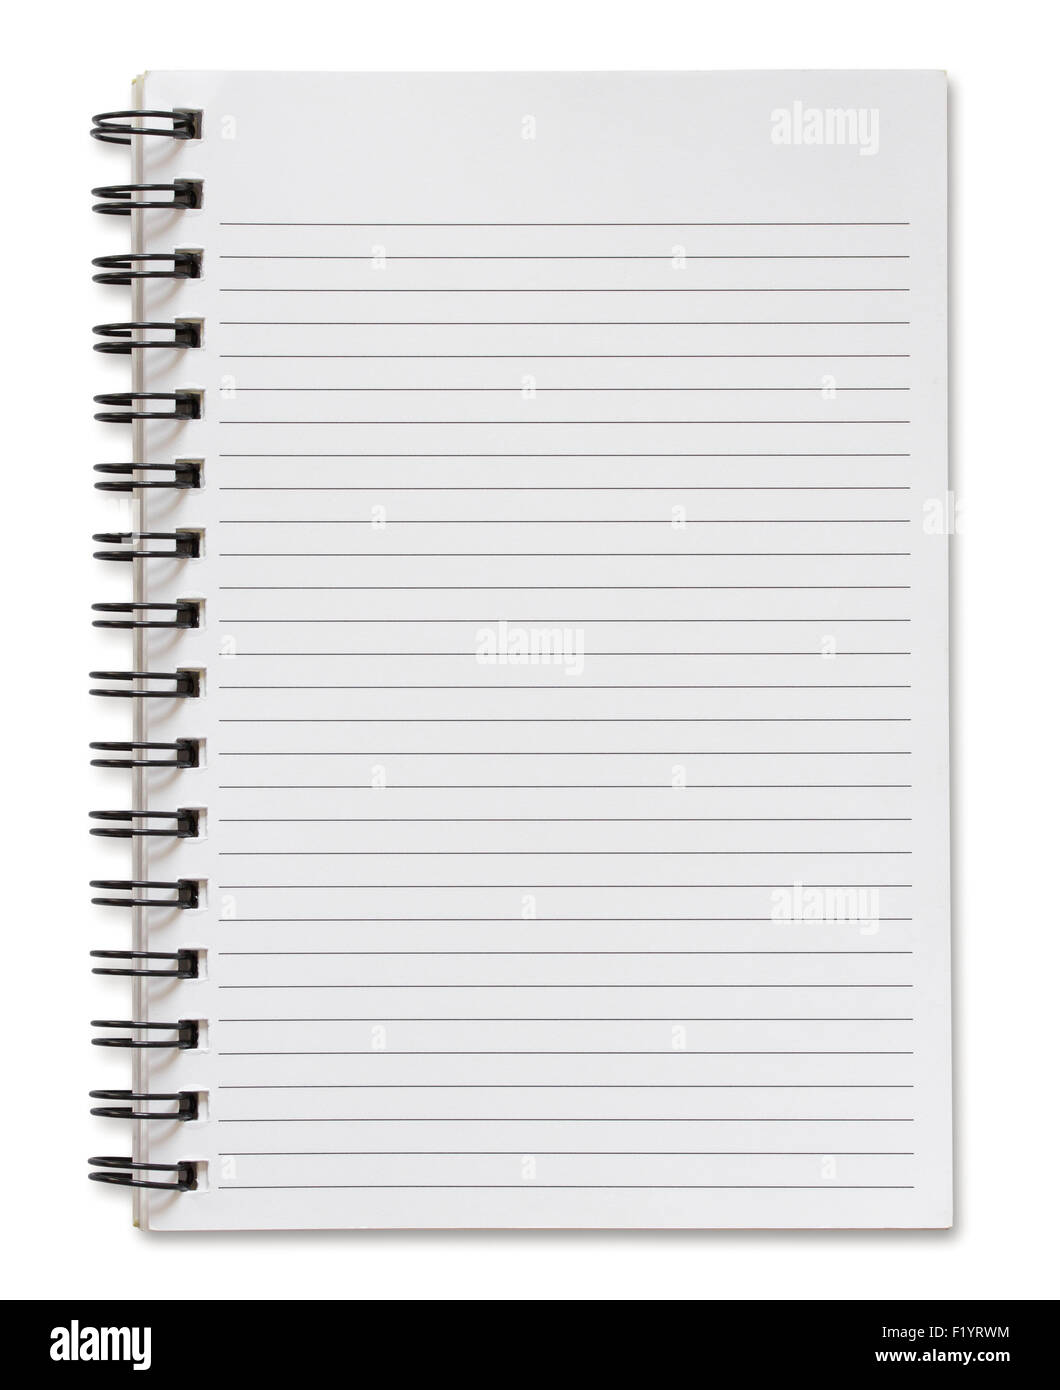 blank spiral notebook isolated on white background Stock Photo